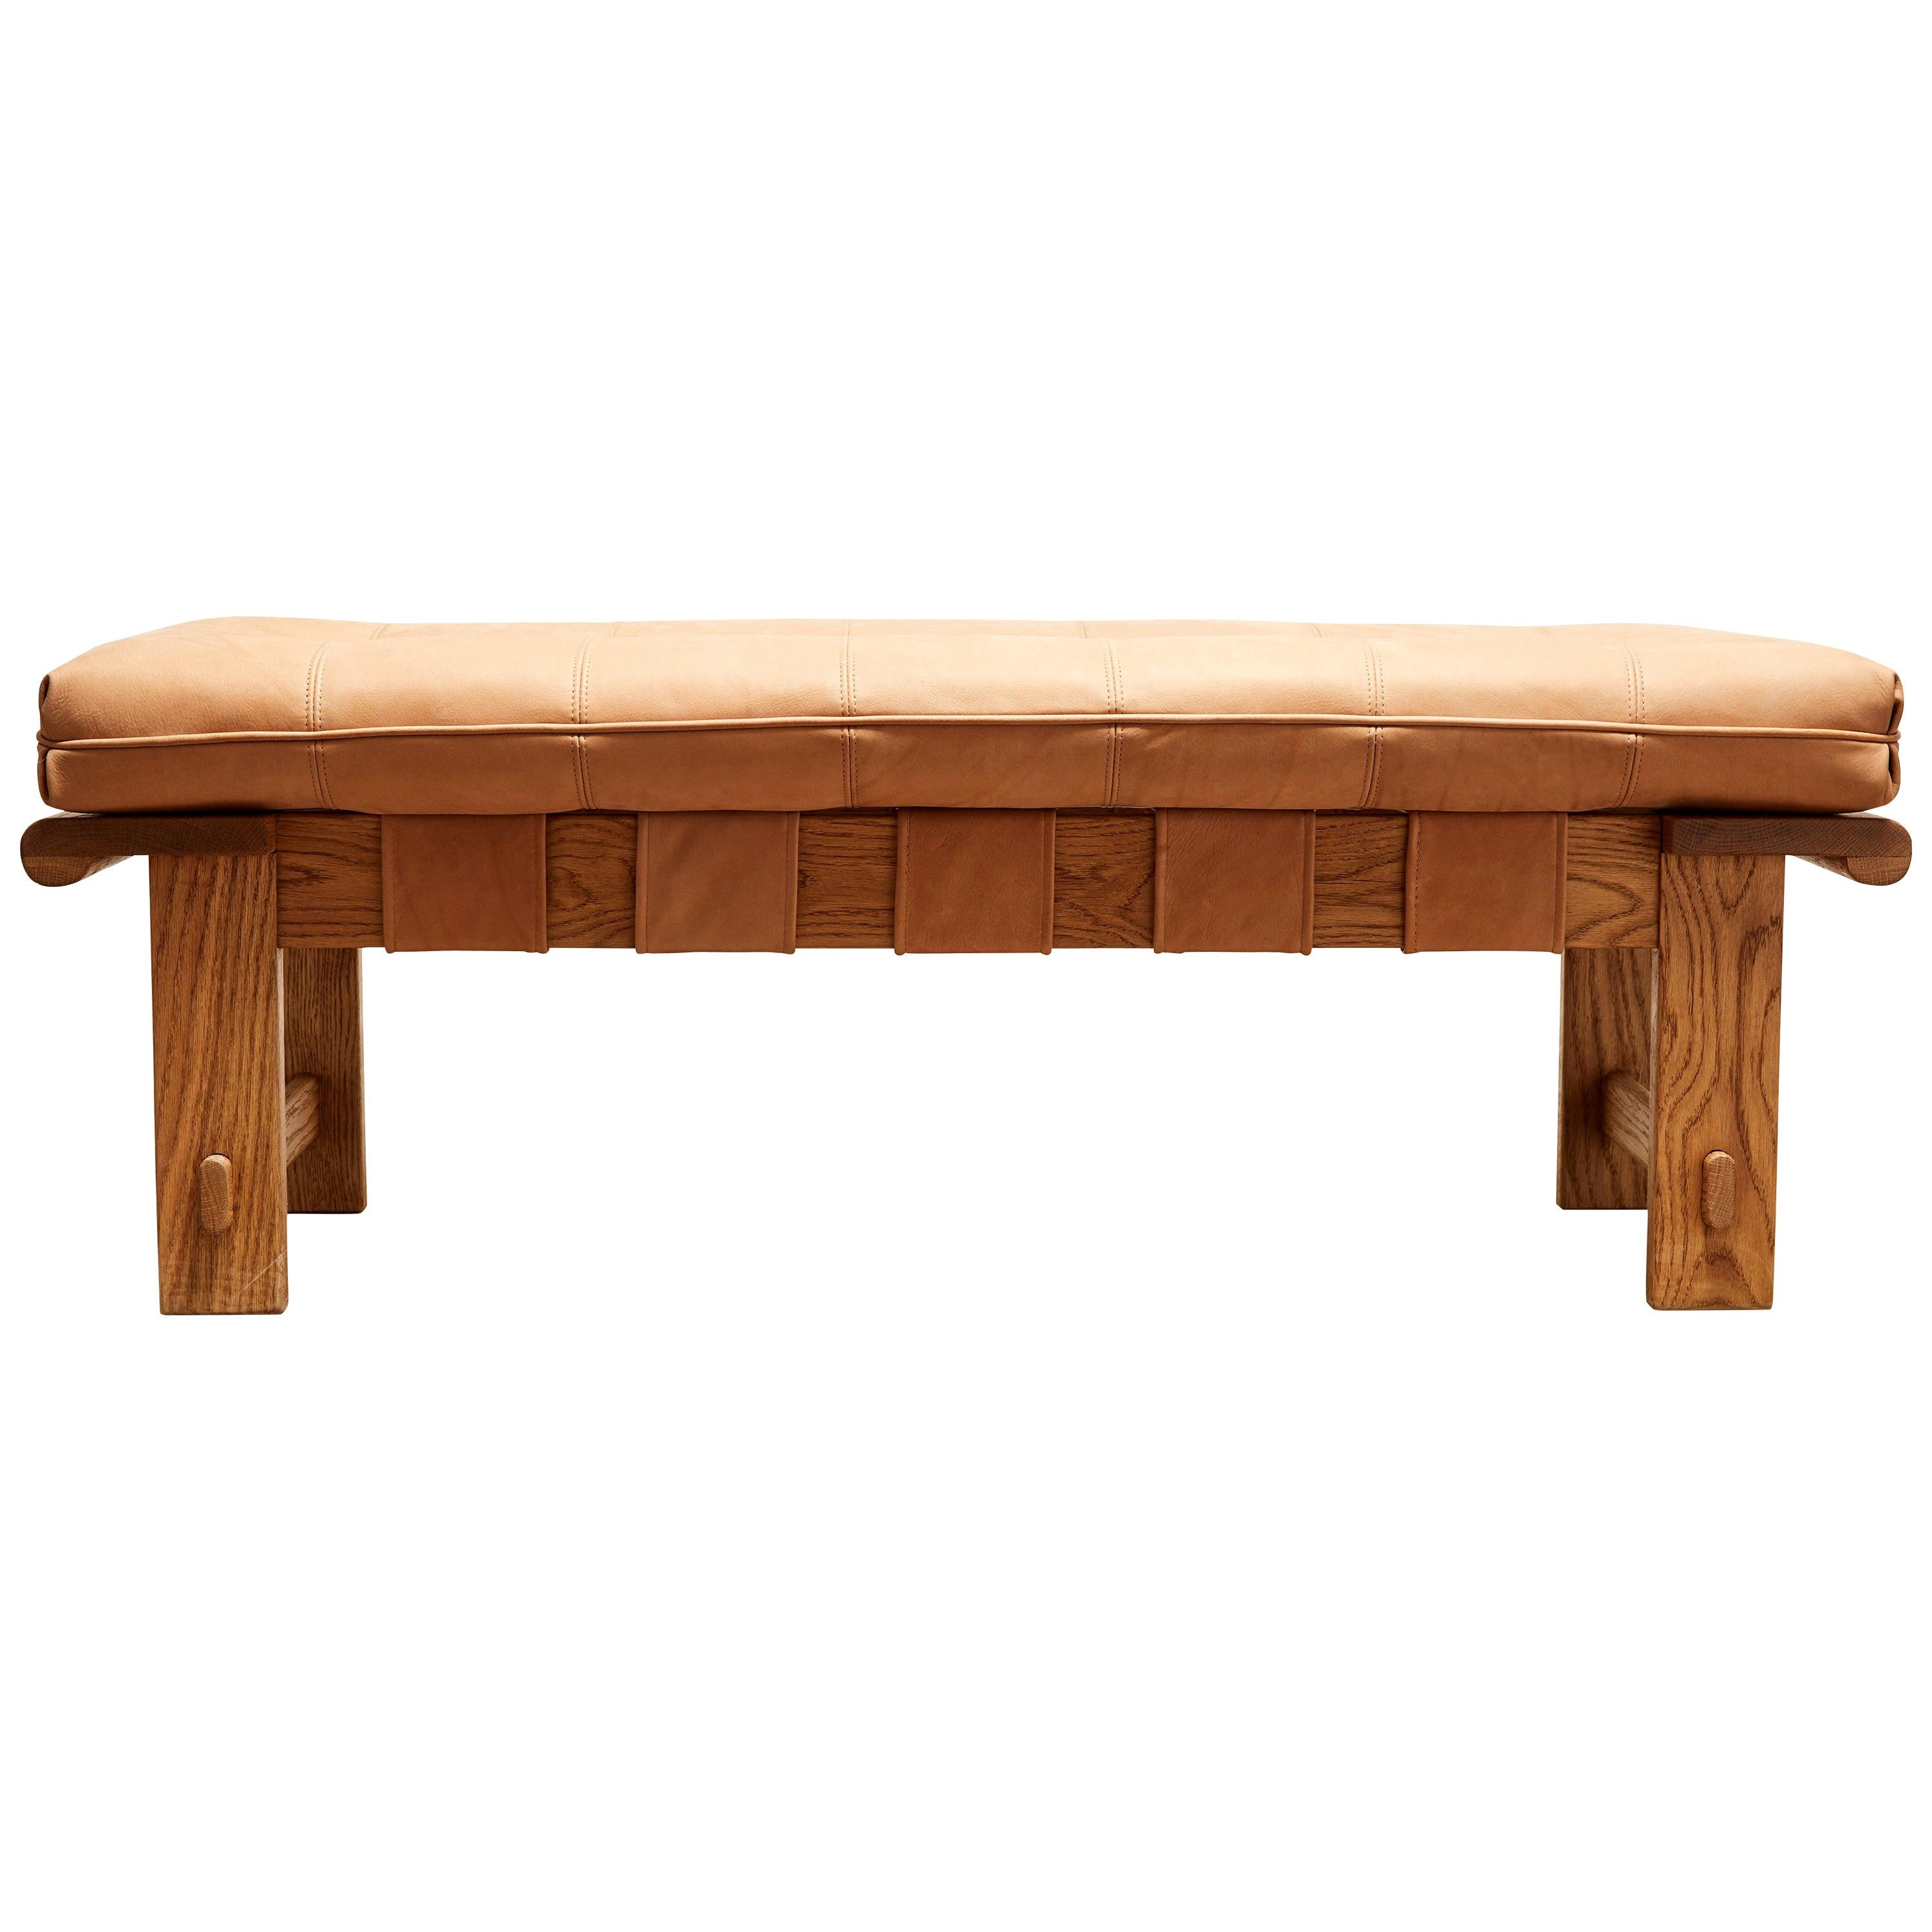 Tan Leather and Oiled Oak Ojai Bench by Lawson-Fenning